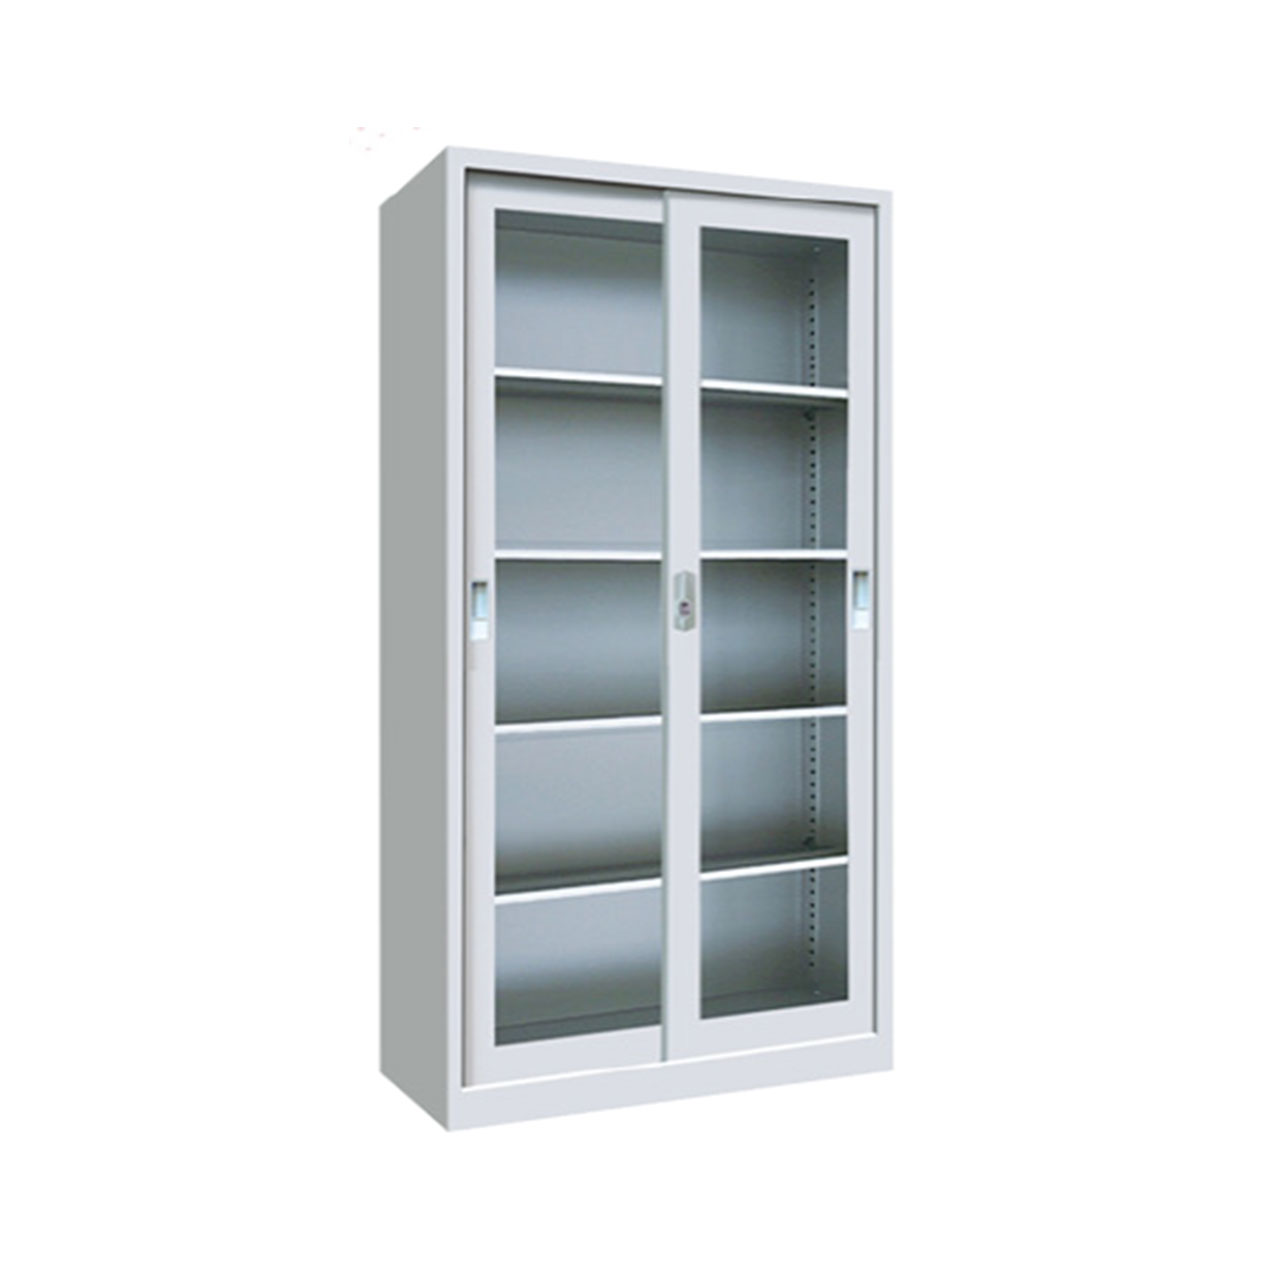 5-Layer Steel Cabinet with Glass Sliding Doors - Draf Office Furniture